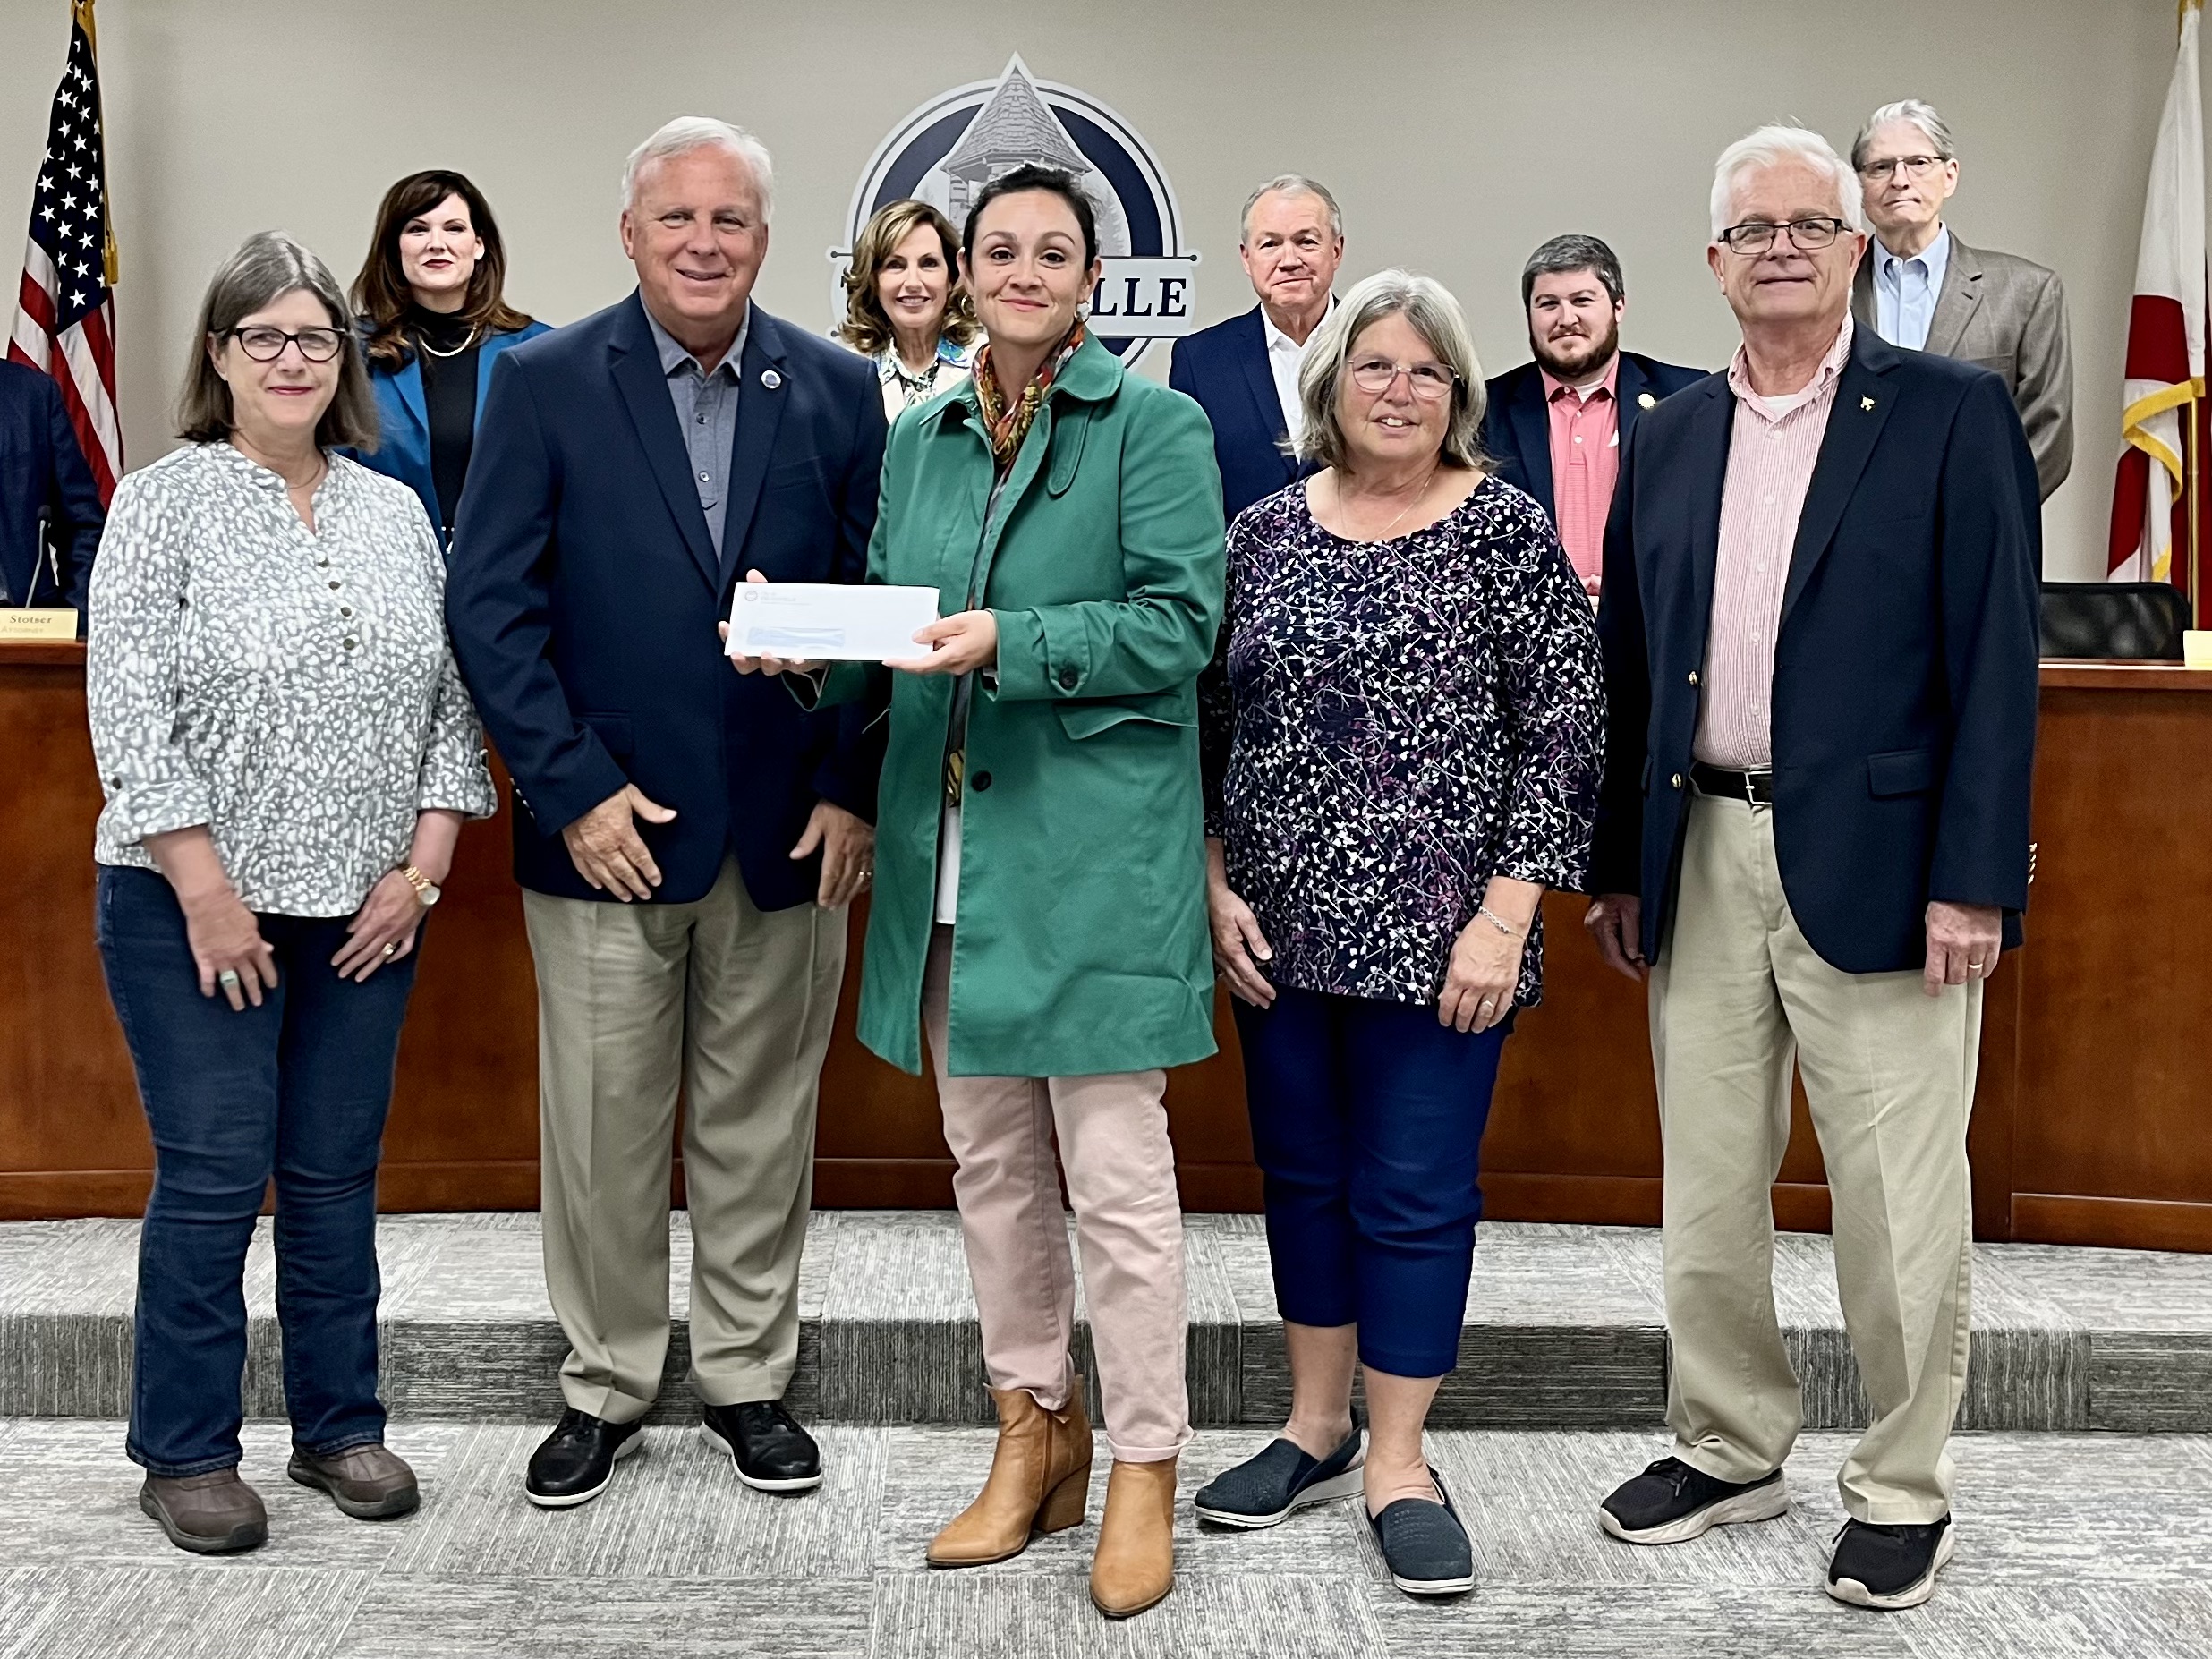 Trussville Council presents check to Cahaba Homestead Heritage Foundation